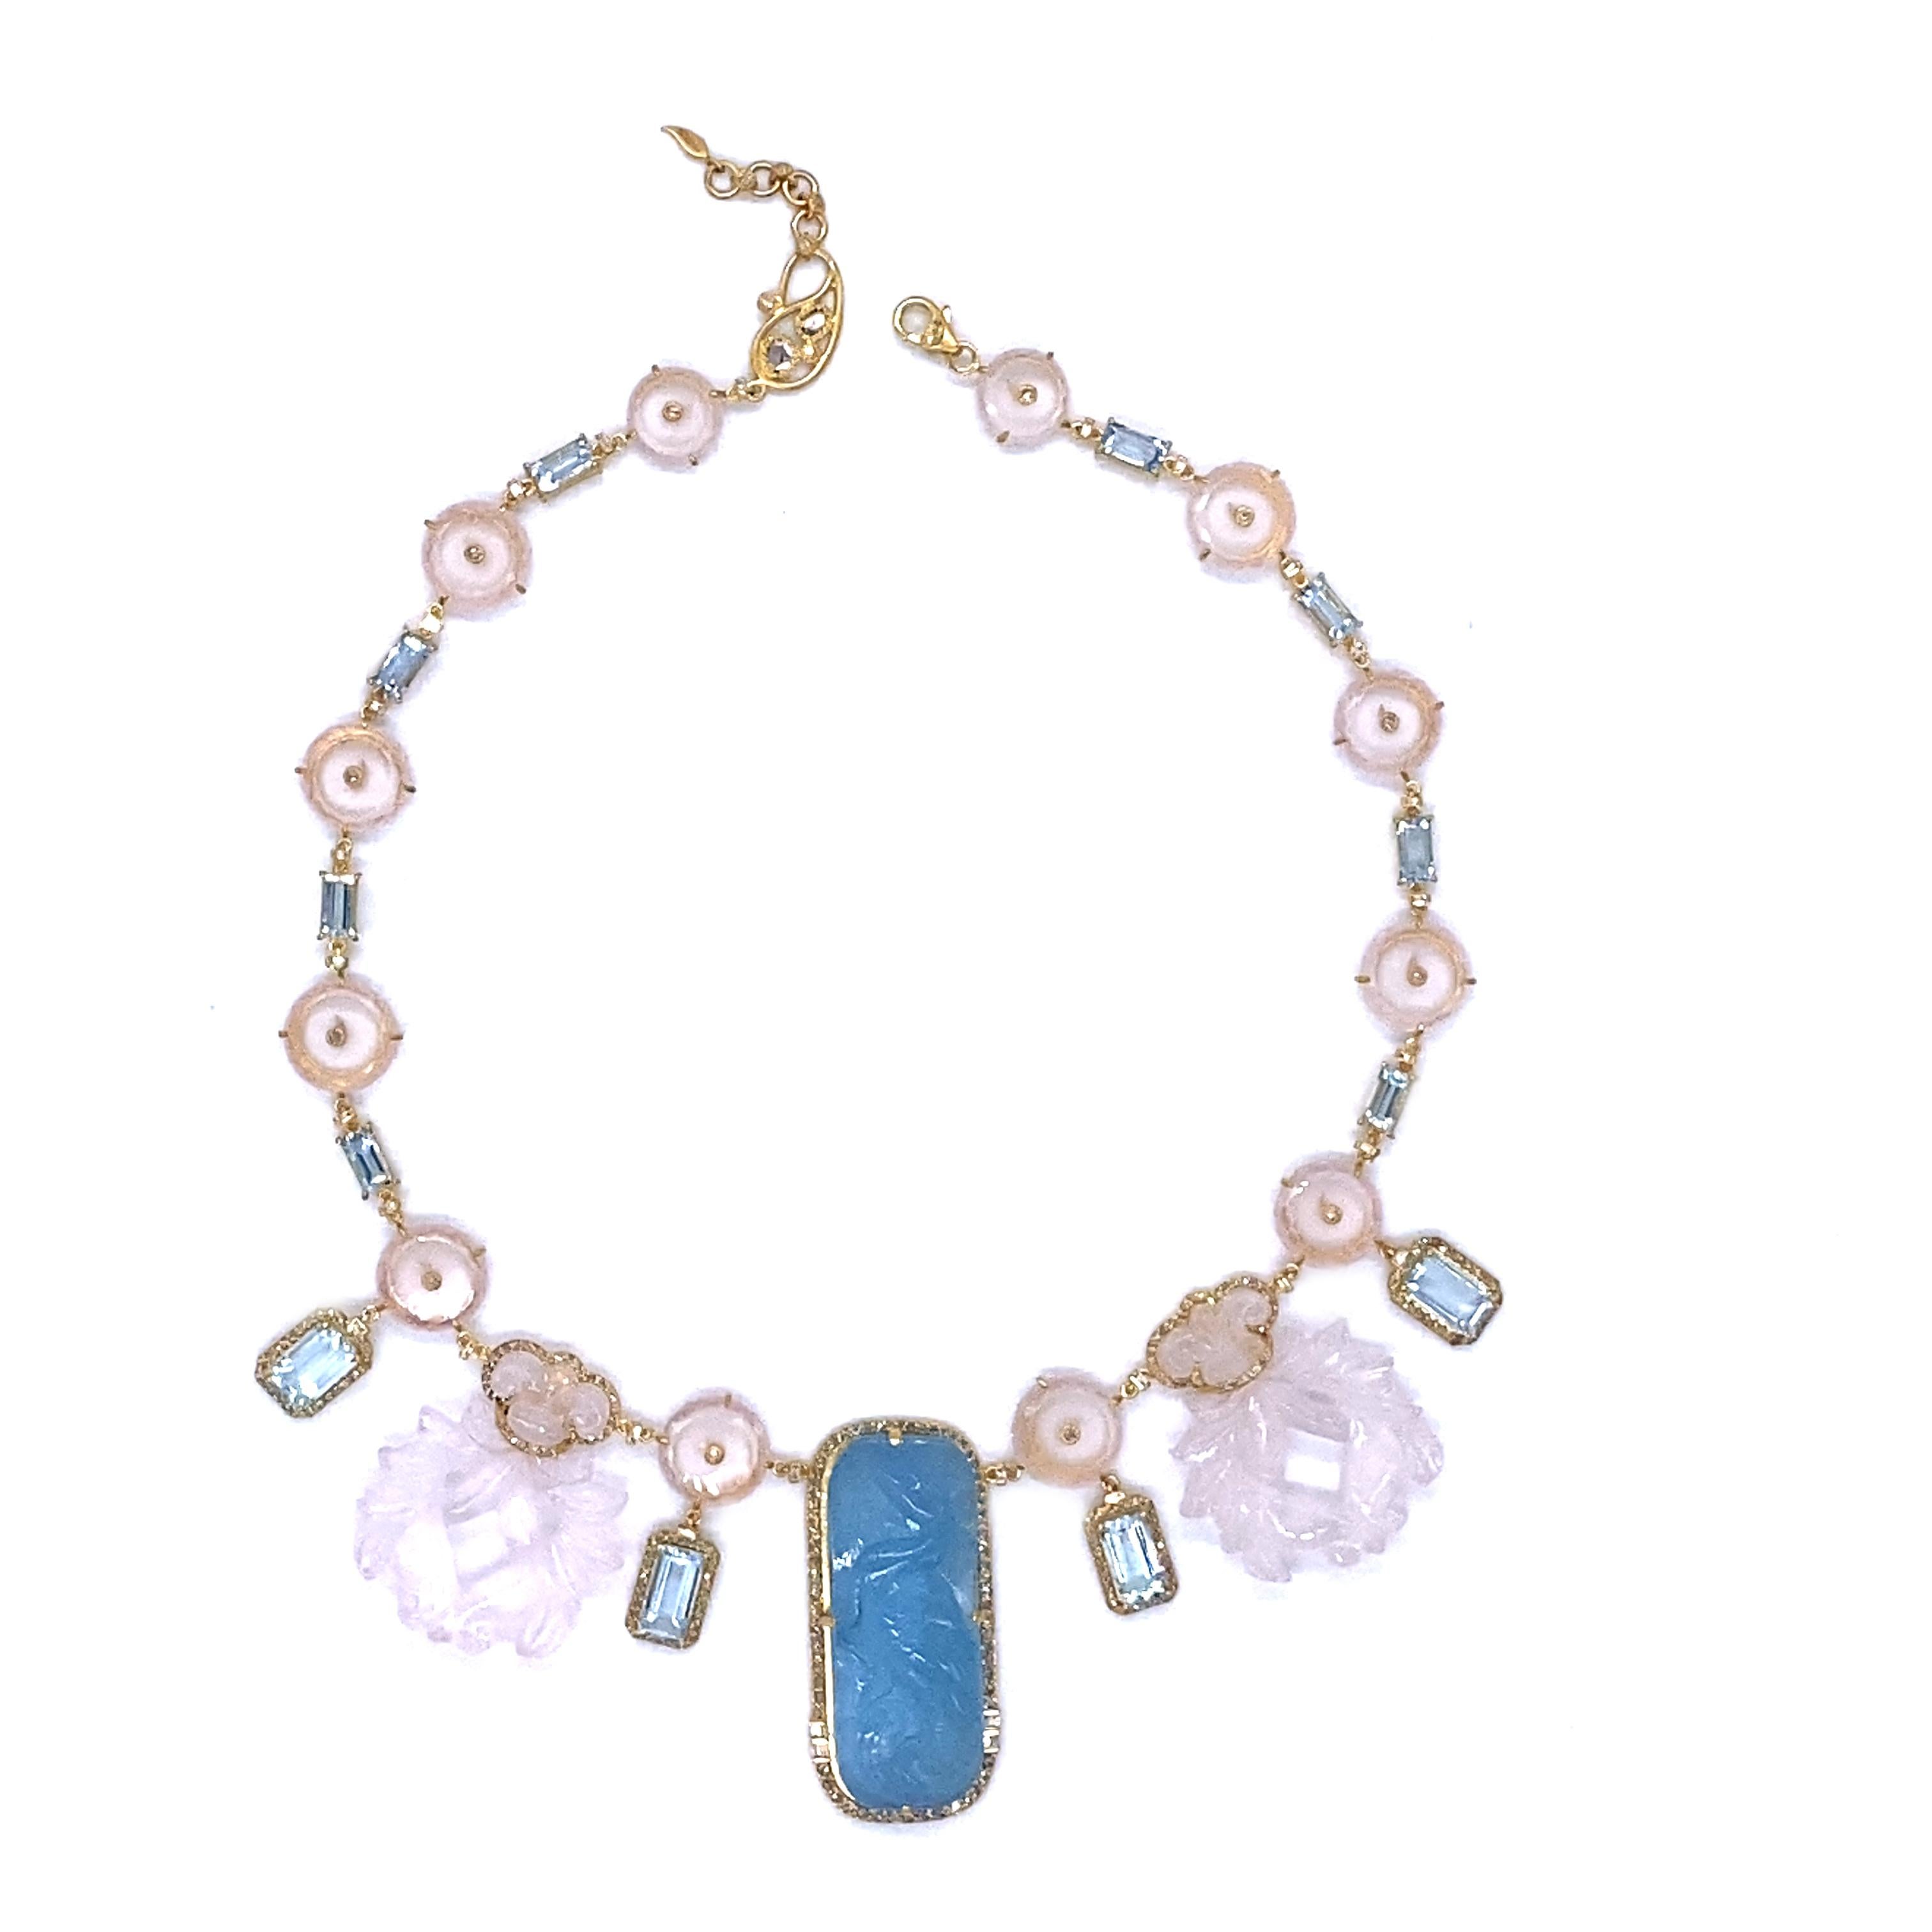 Rose Quartz Necklace with 161.53 Carat Rose Quartz, 81.39 Carat Aquamarine, and 4.28 Carat Diamonds. The Necklace and Individual Stones Are Designed On A 20 Karat Yellow Gold Chain With A Clasp.